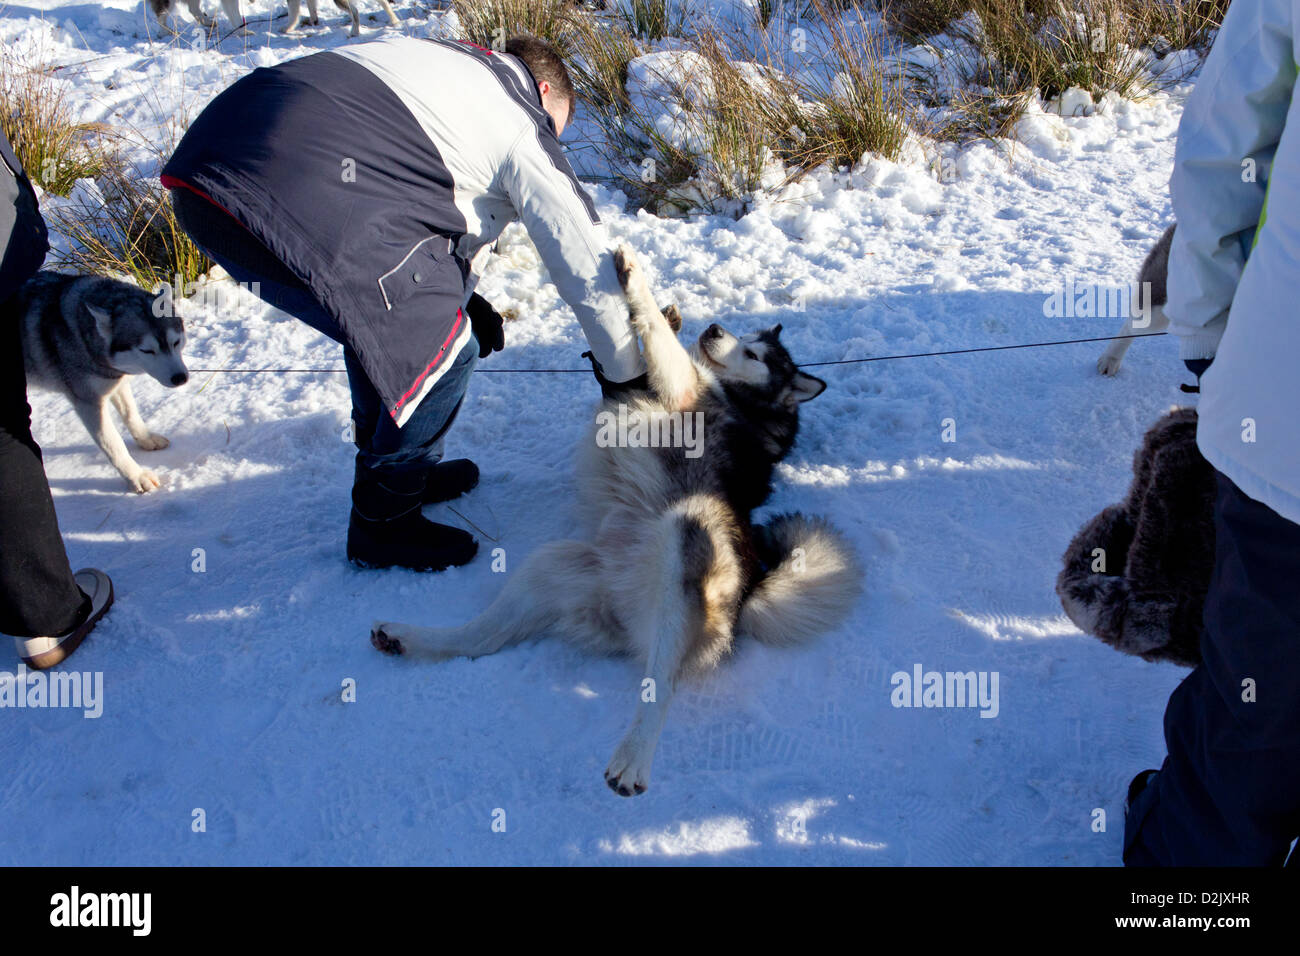 Aviemore, UK. 26th Jan, 2013. A Siberian husky shows its soft side at the 30th Annual Aviemore Sled Dog Rally in Glenmore Forest Park. This is the biggest British sled dog racing event of the year and husky enthusiasts have gathered to watch and take part. Stock Photo